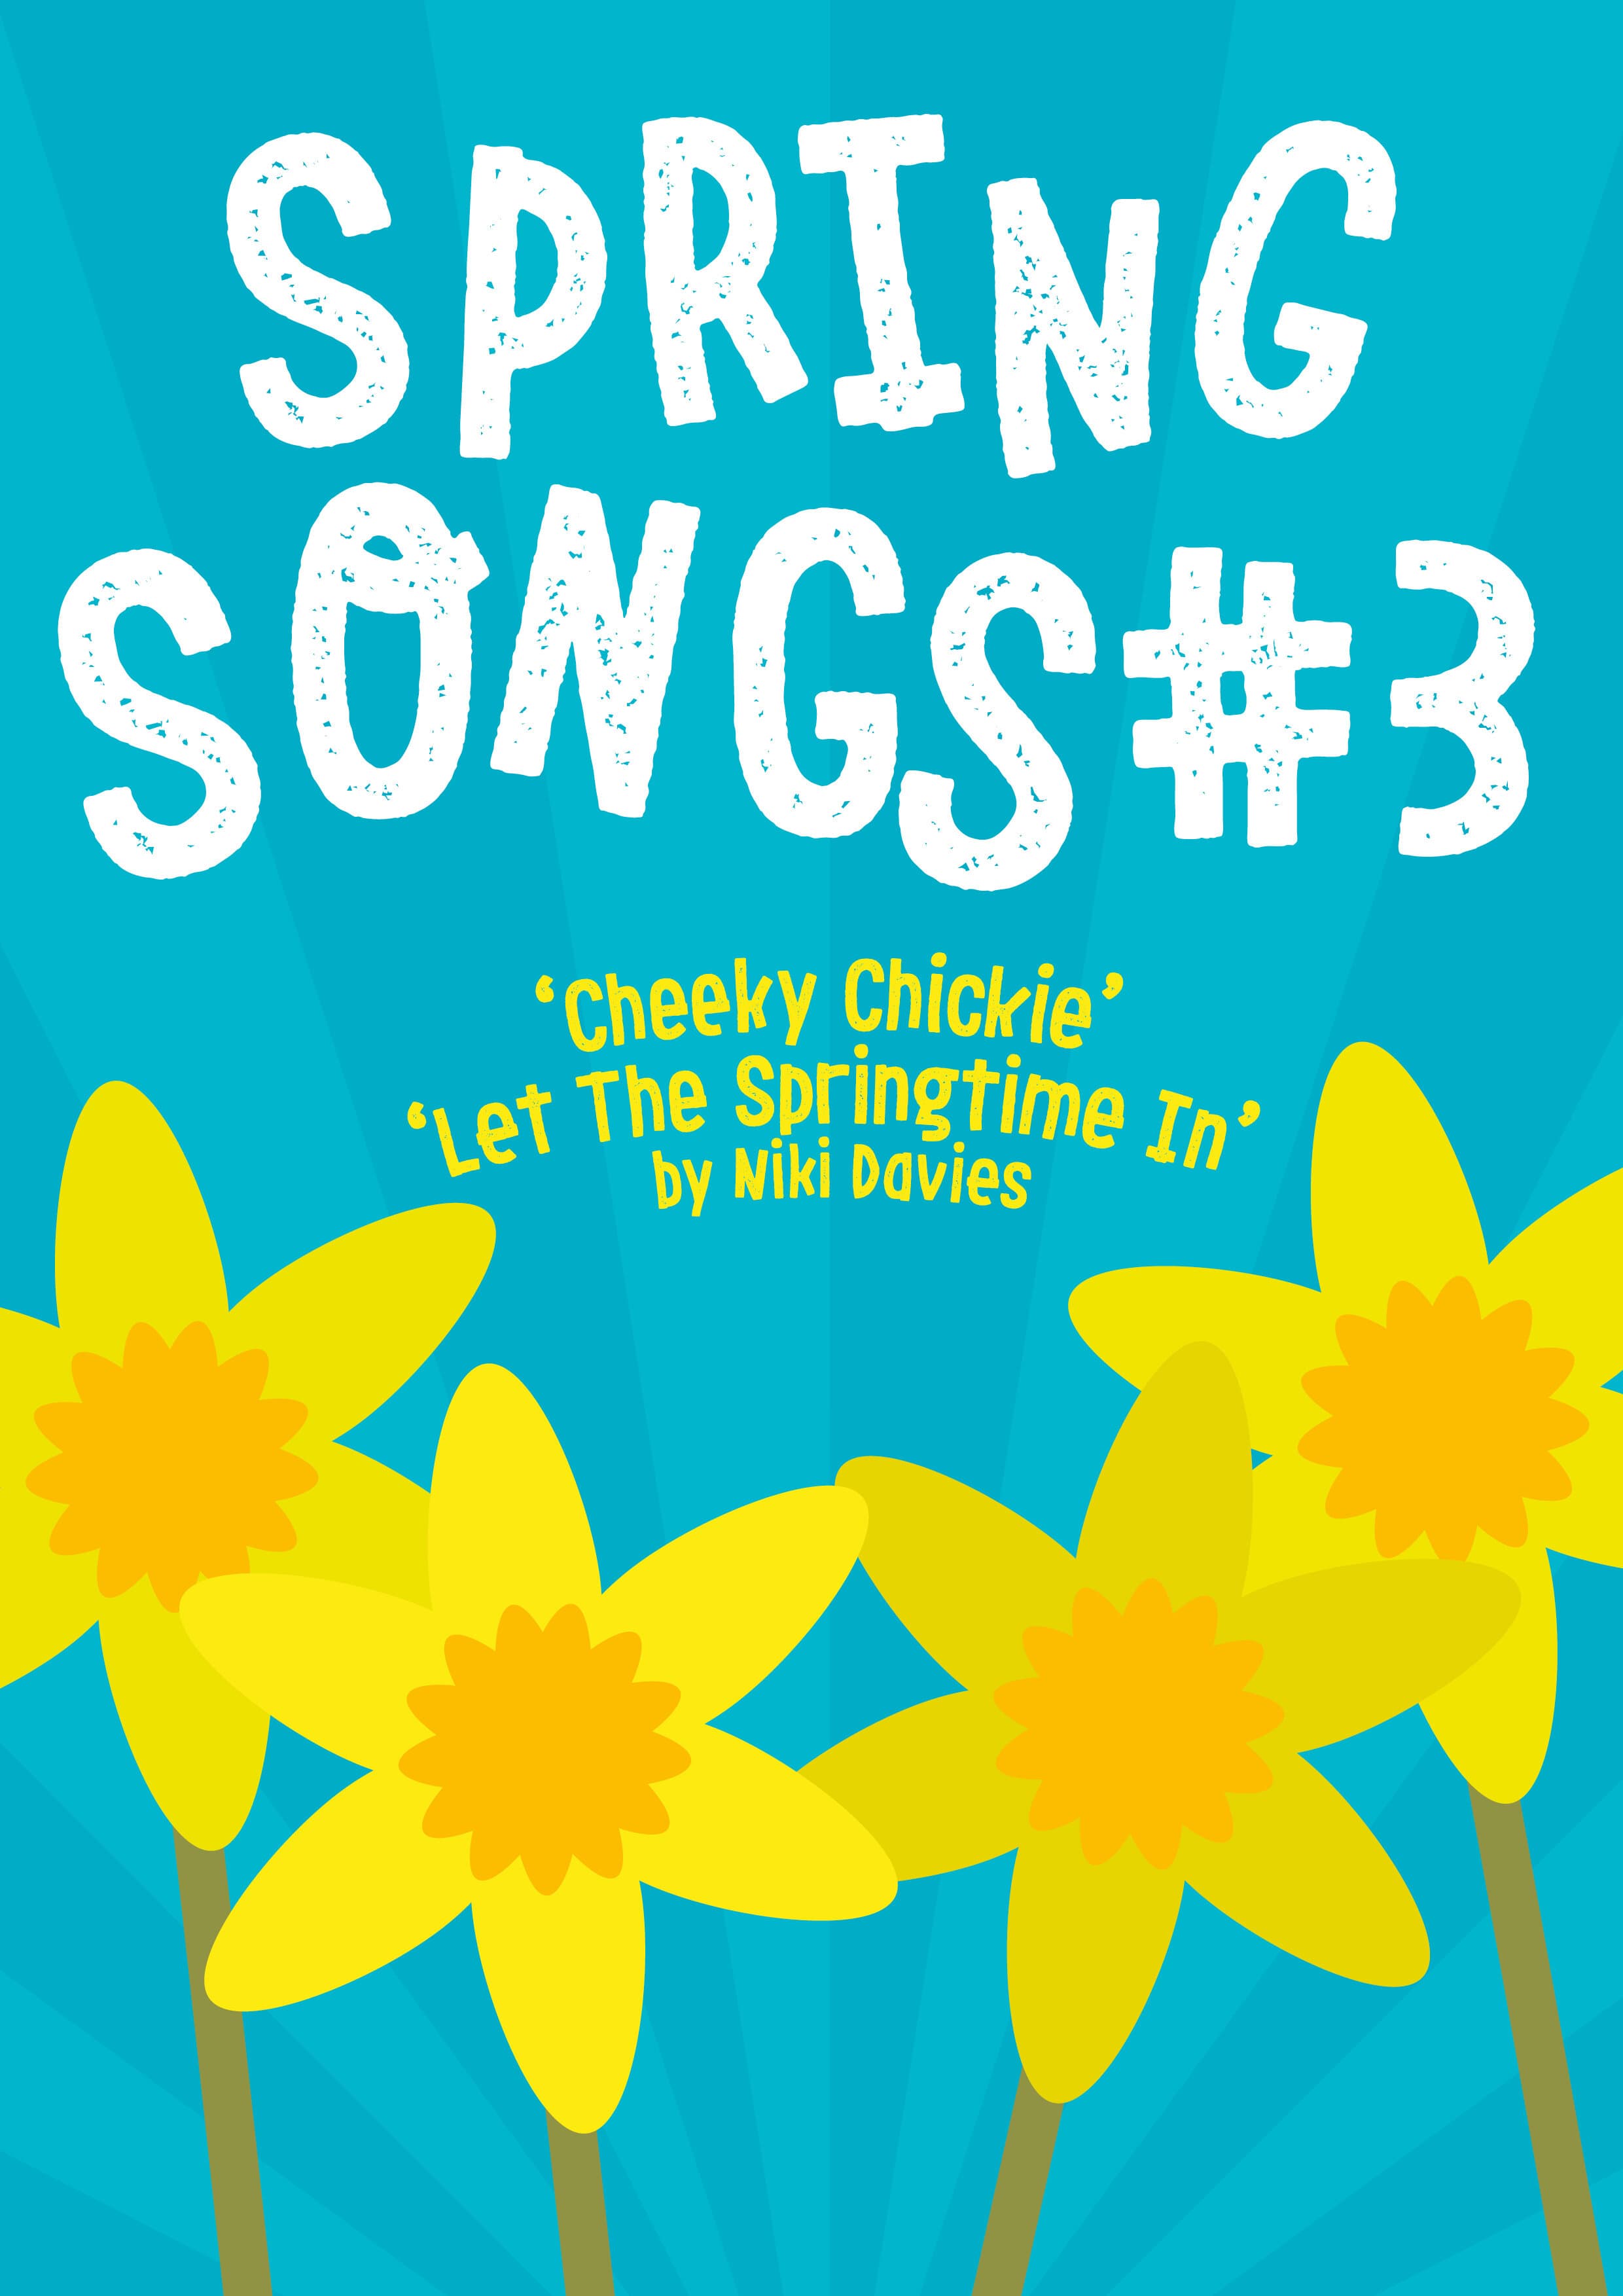 Spring Songs #3 Download Pack - 100% discount with code SPRING300